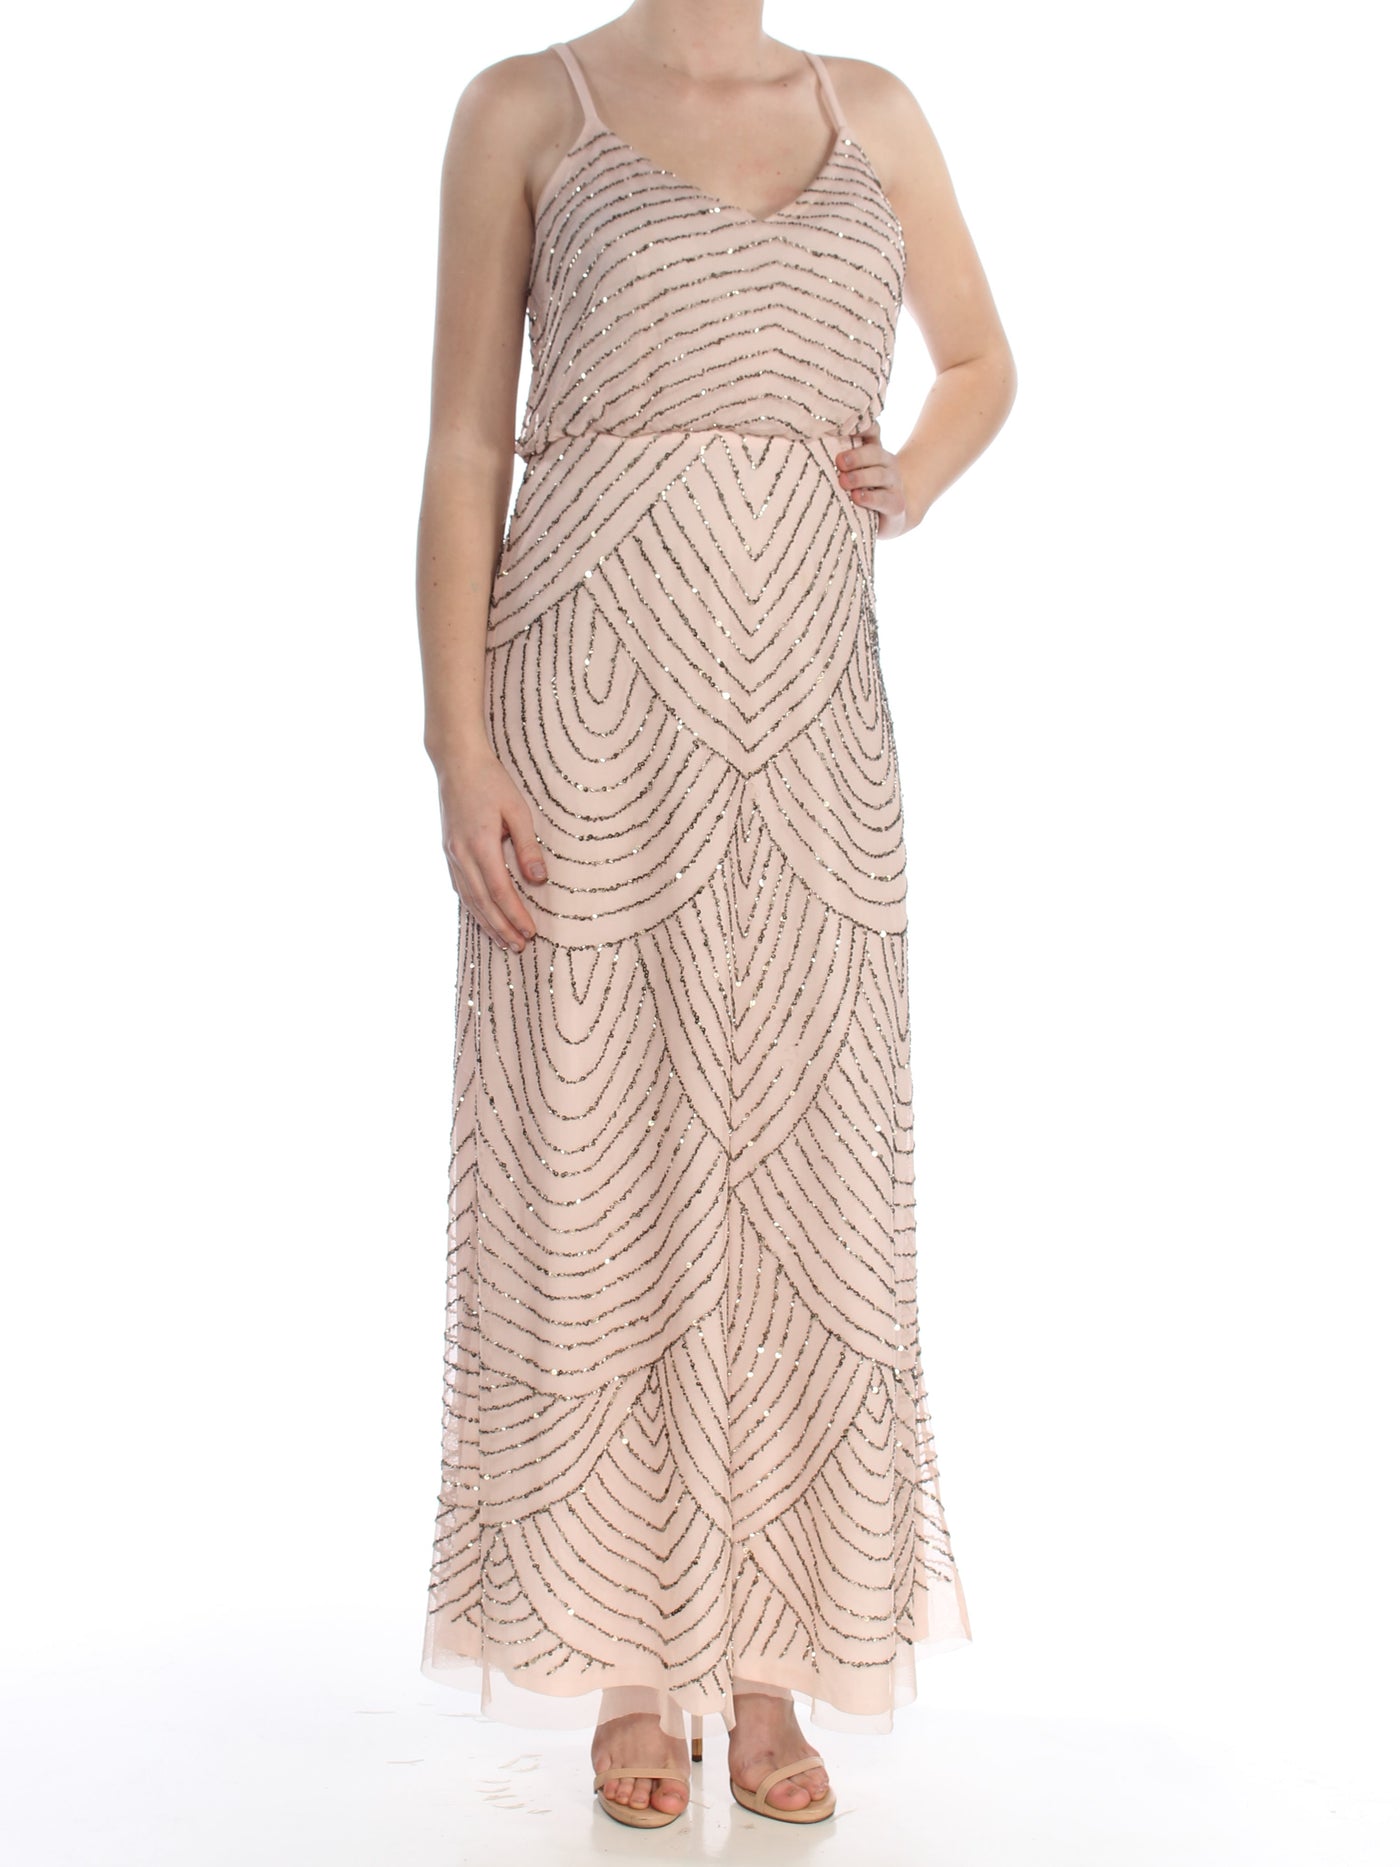 ADRIANNA PAPELL Womens Beige Beaded Gown Printed Spaghetti Strap Scoop Neck Full-Length Evening Blouson Dress